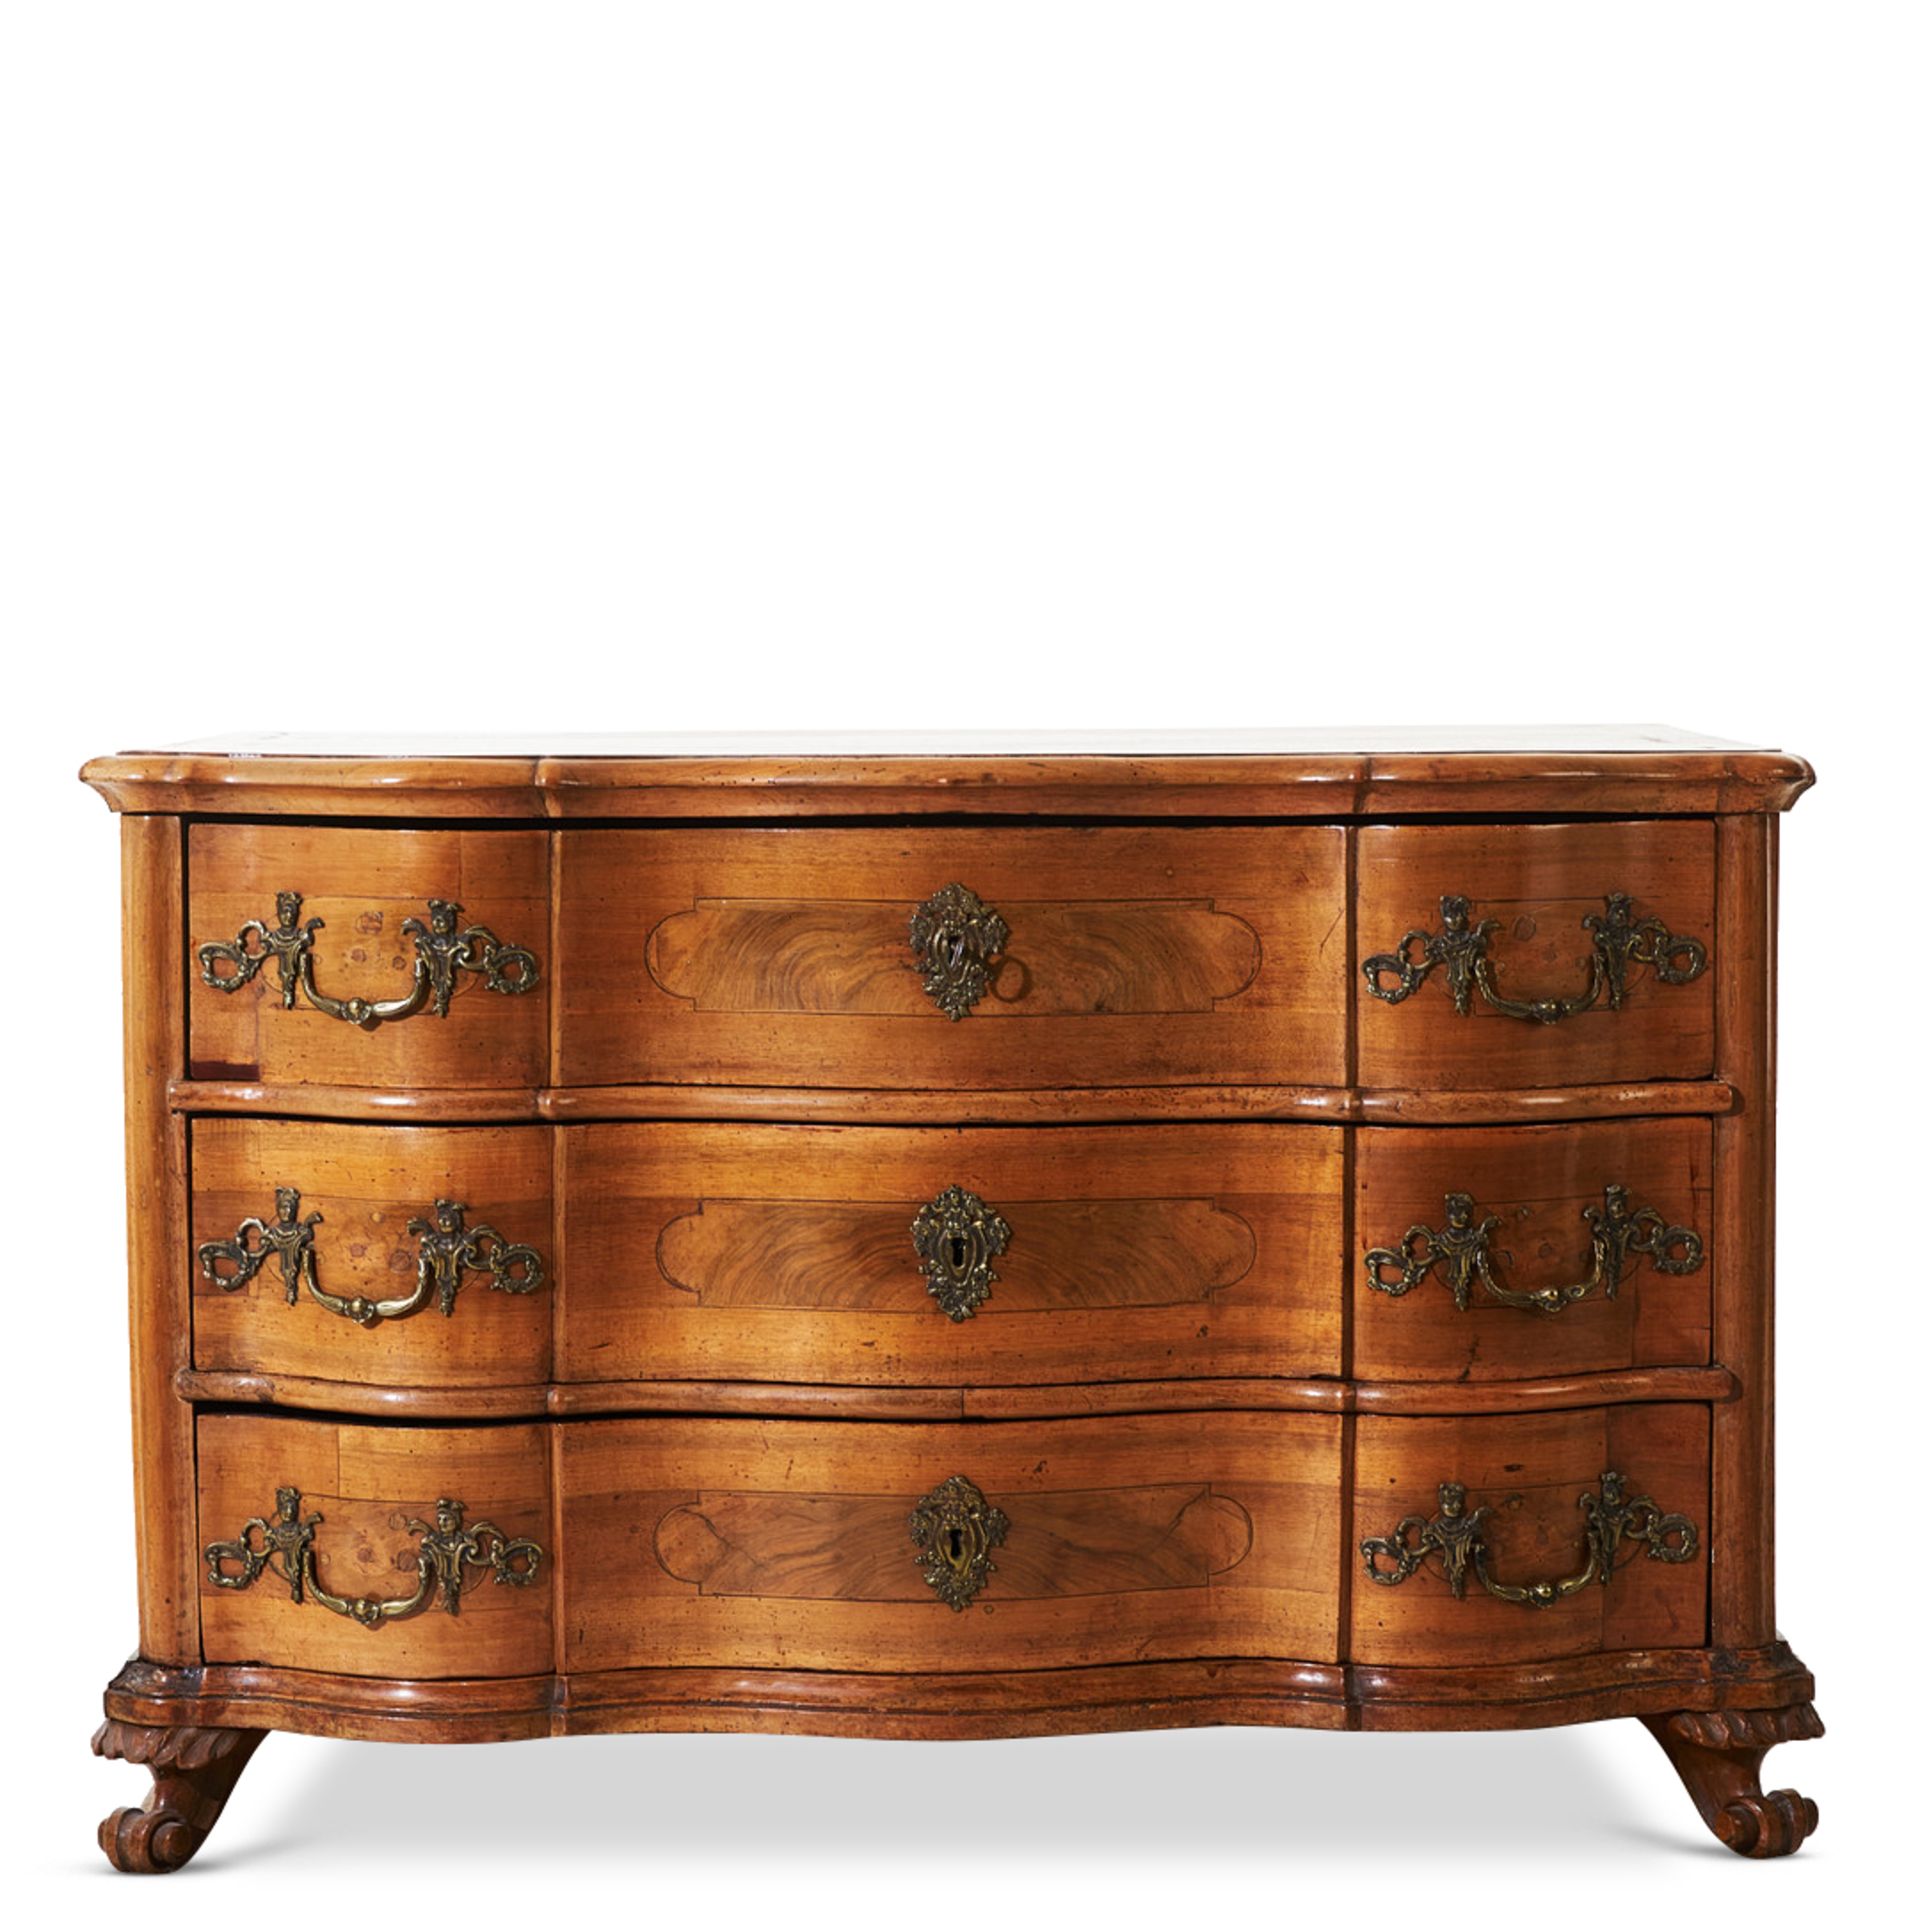 AN 18TH CENTURY ITALIAN WALNUT SERPENTINE CHEST OF DRAWERS - Image 2 of 8